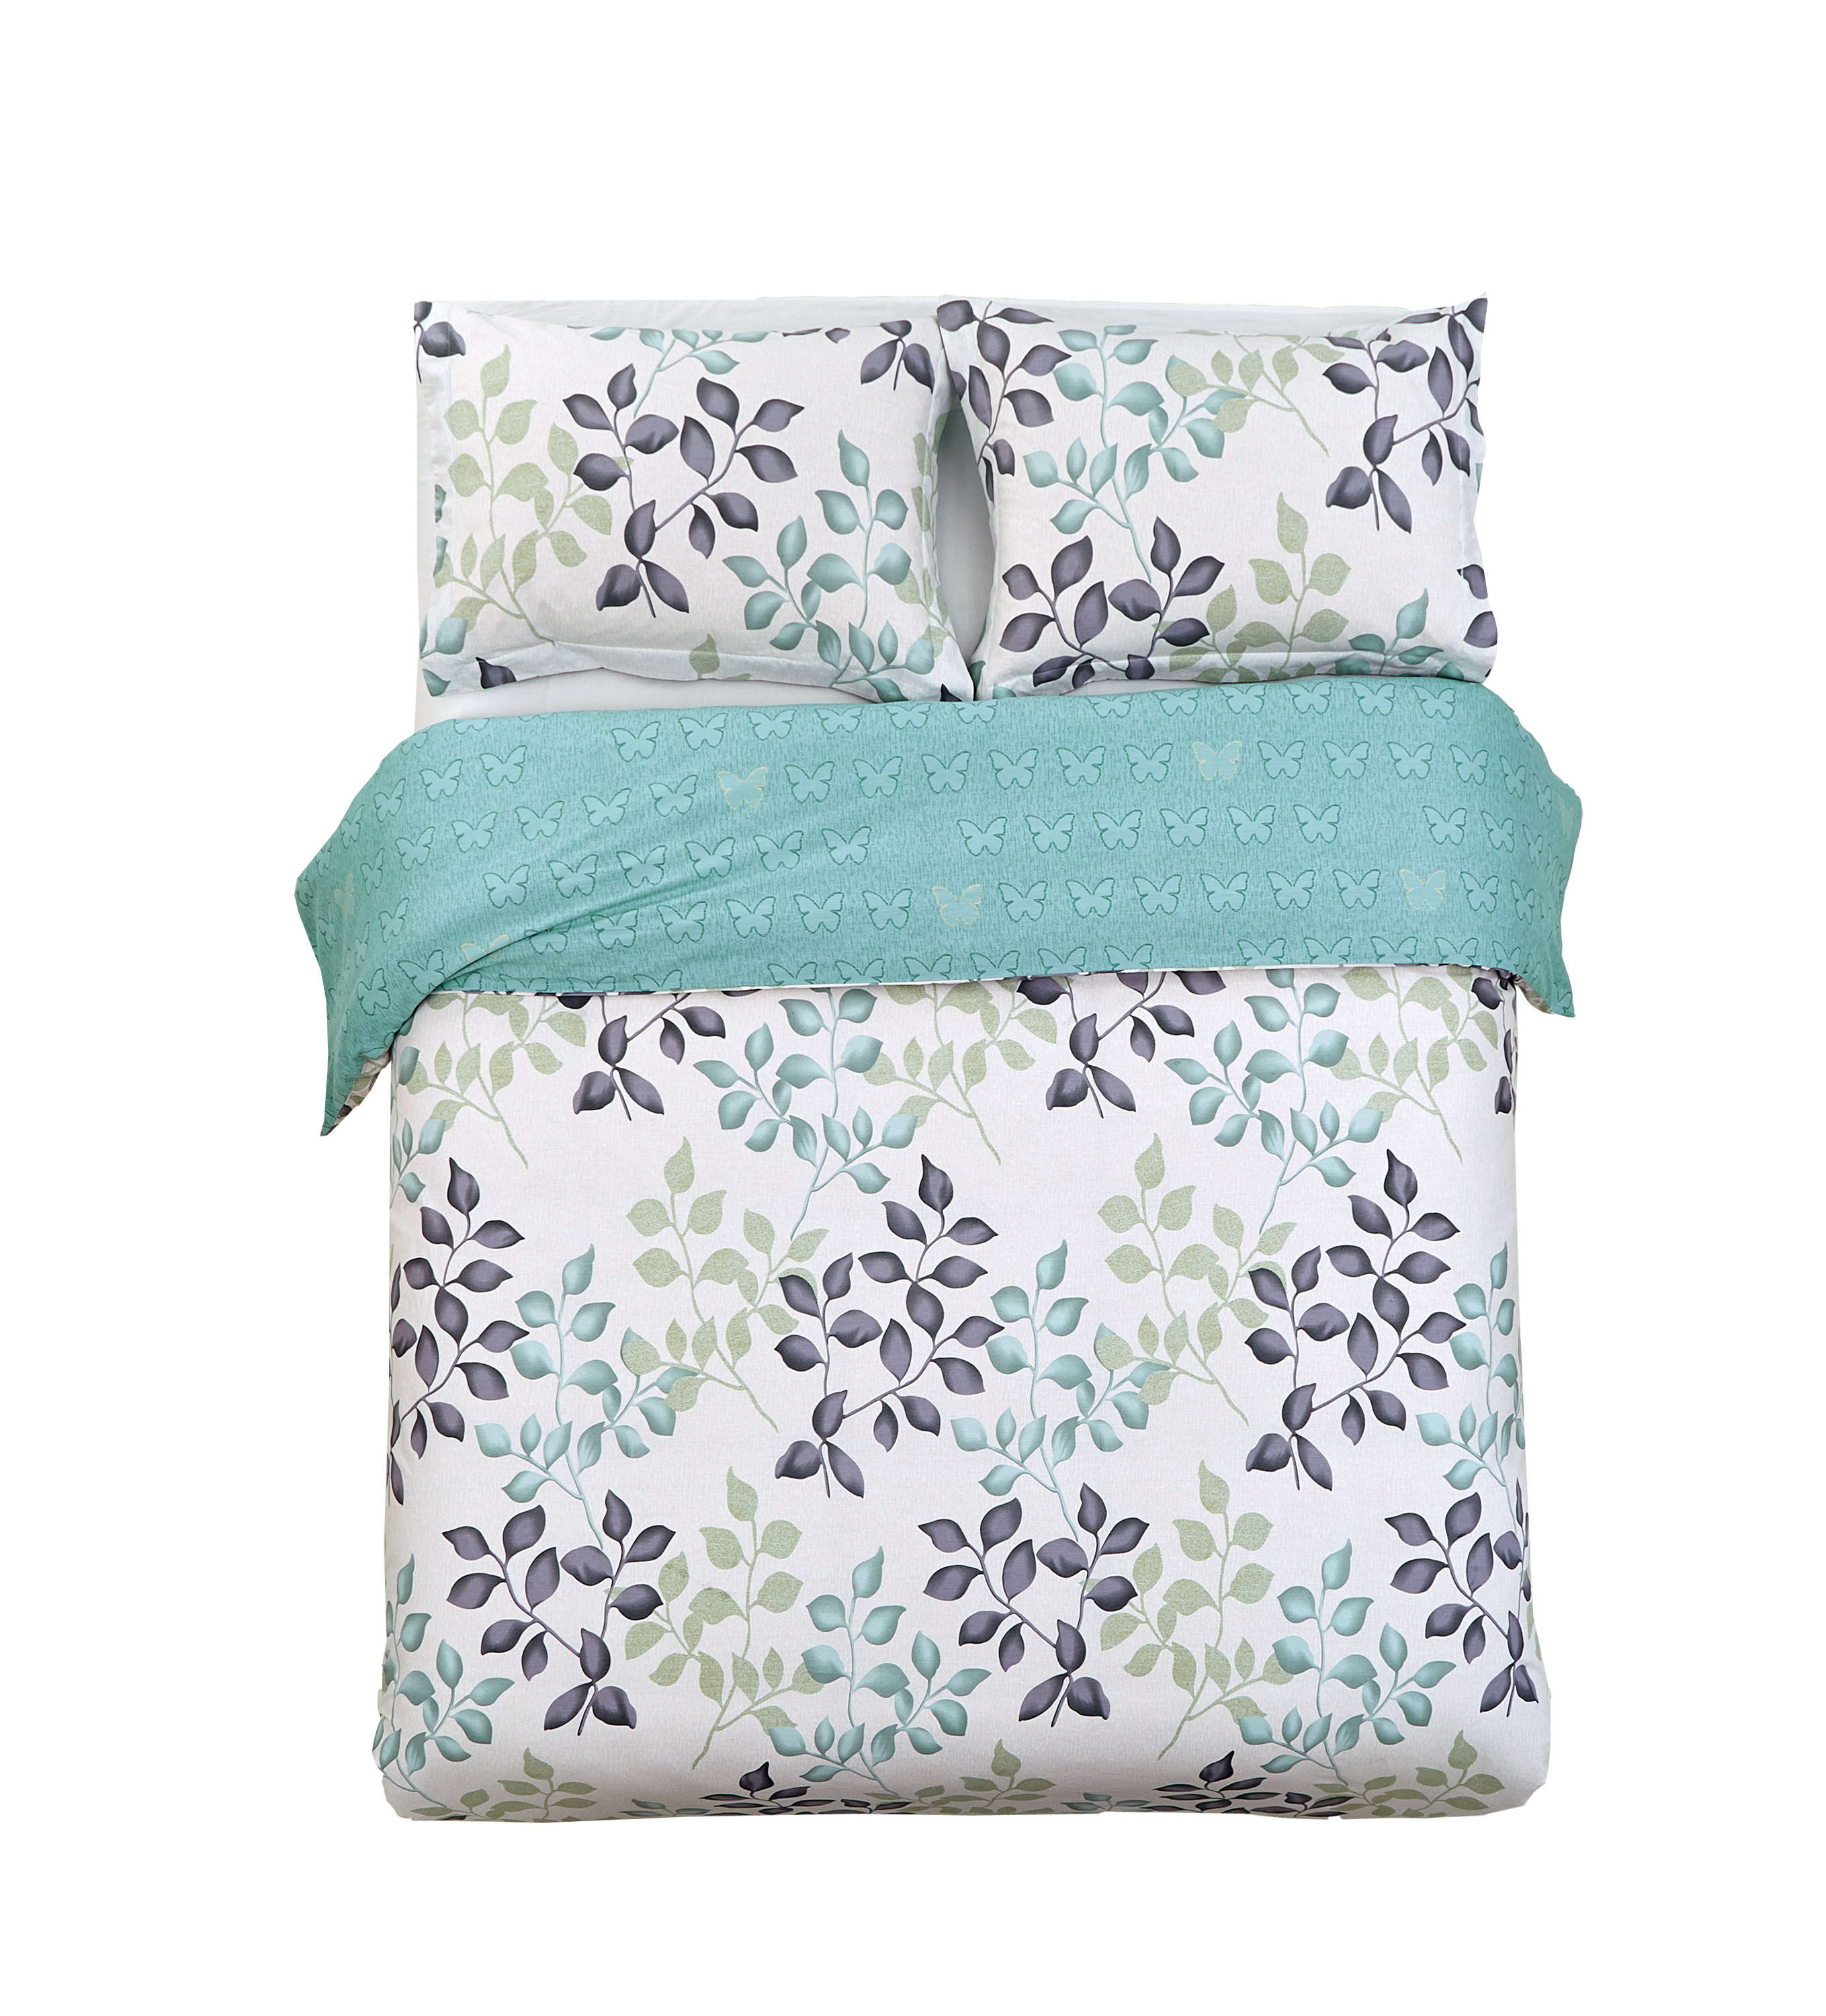 Duvet Cover Sets 3 PC 250TC 100% Cotton Floral Leaves Print Soft Lightweight, Full/Queen